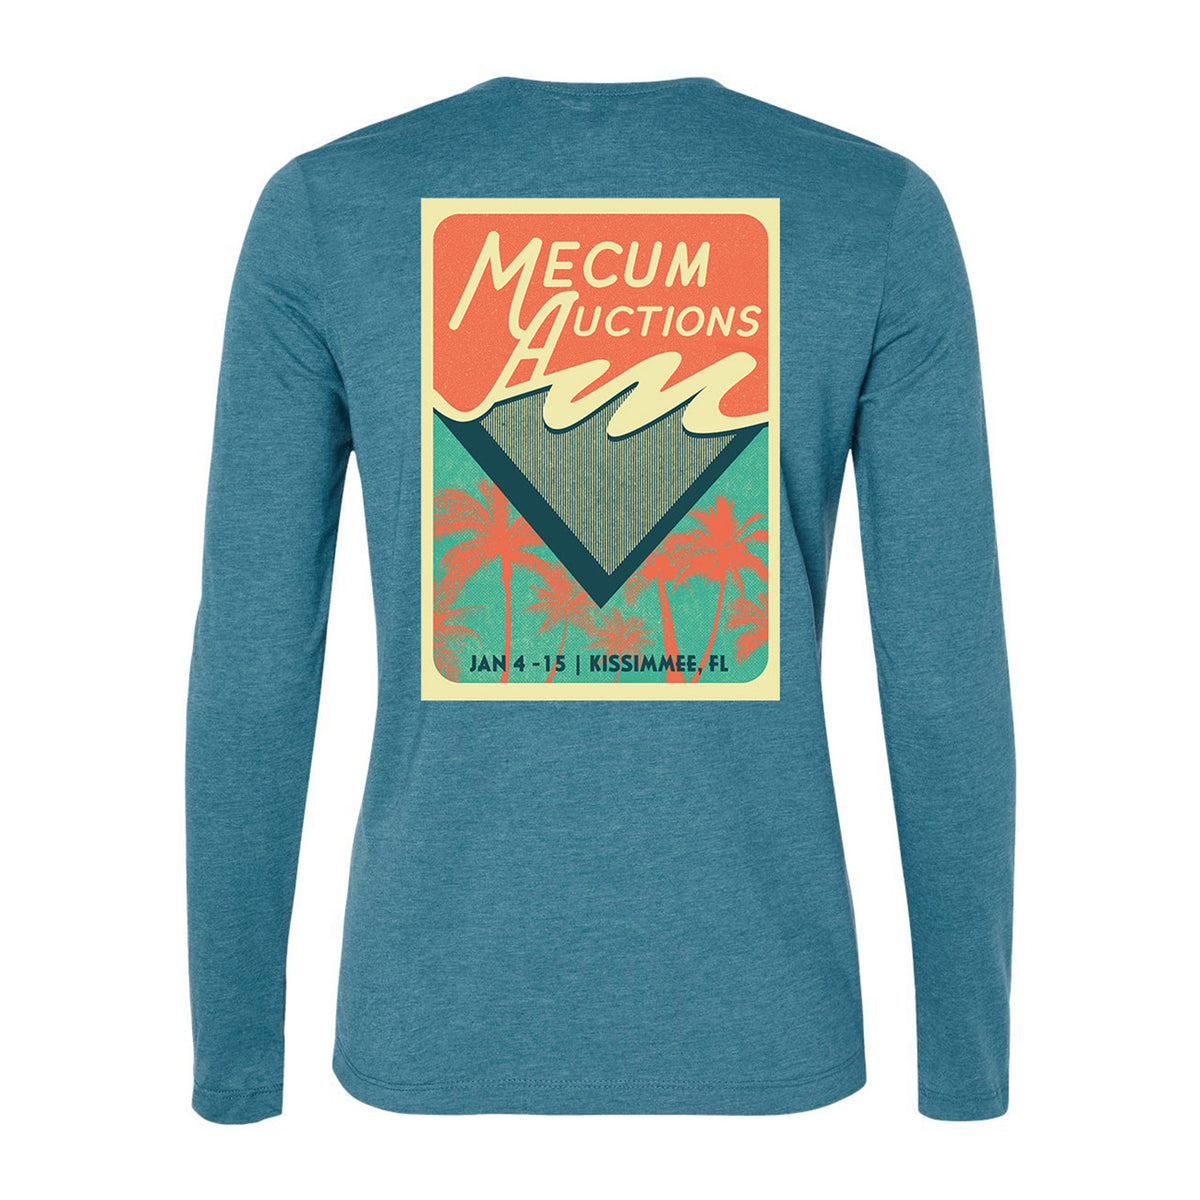 Mecum Auctions Ladies Kissimmee Teal Long Sleeve - Back View